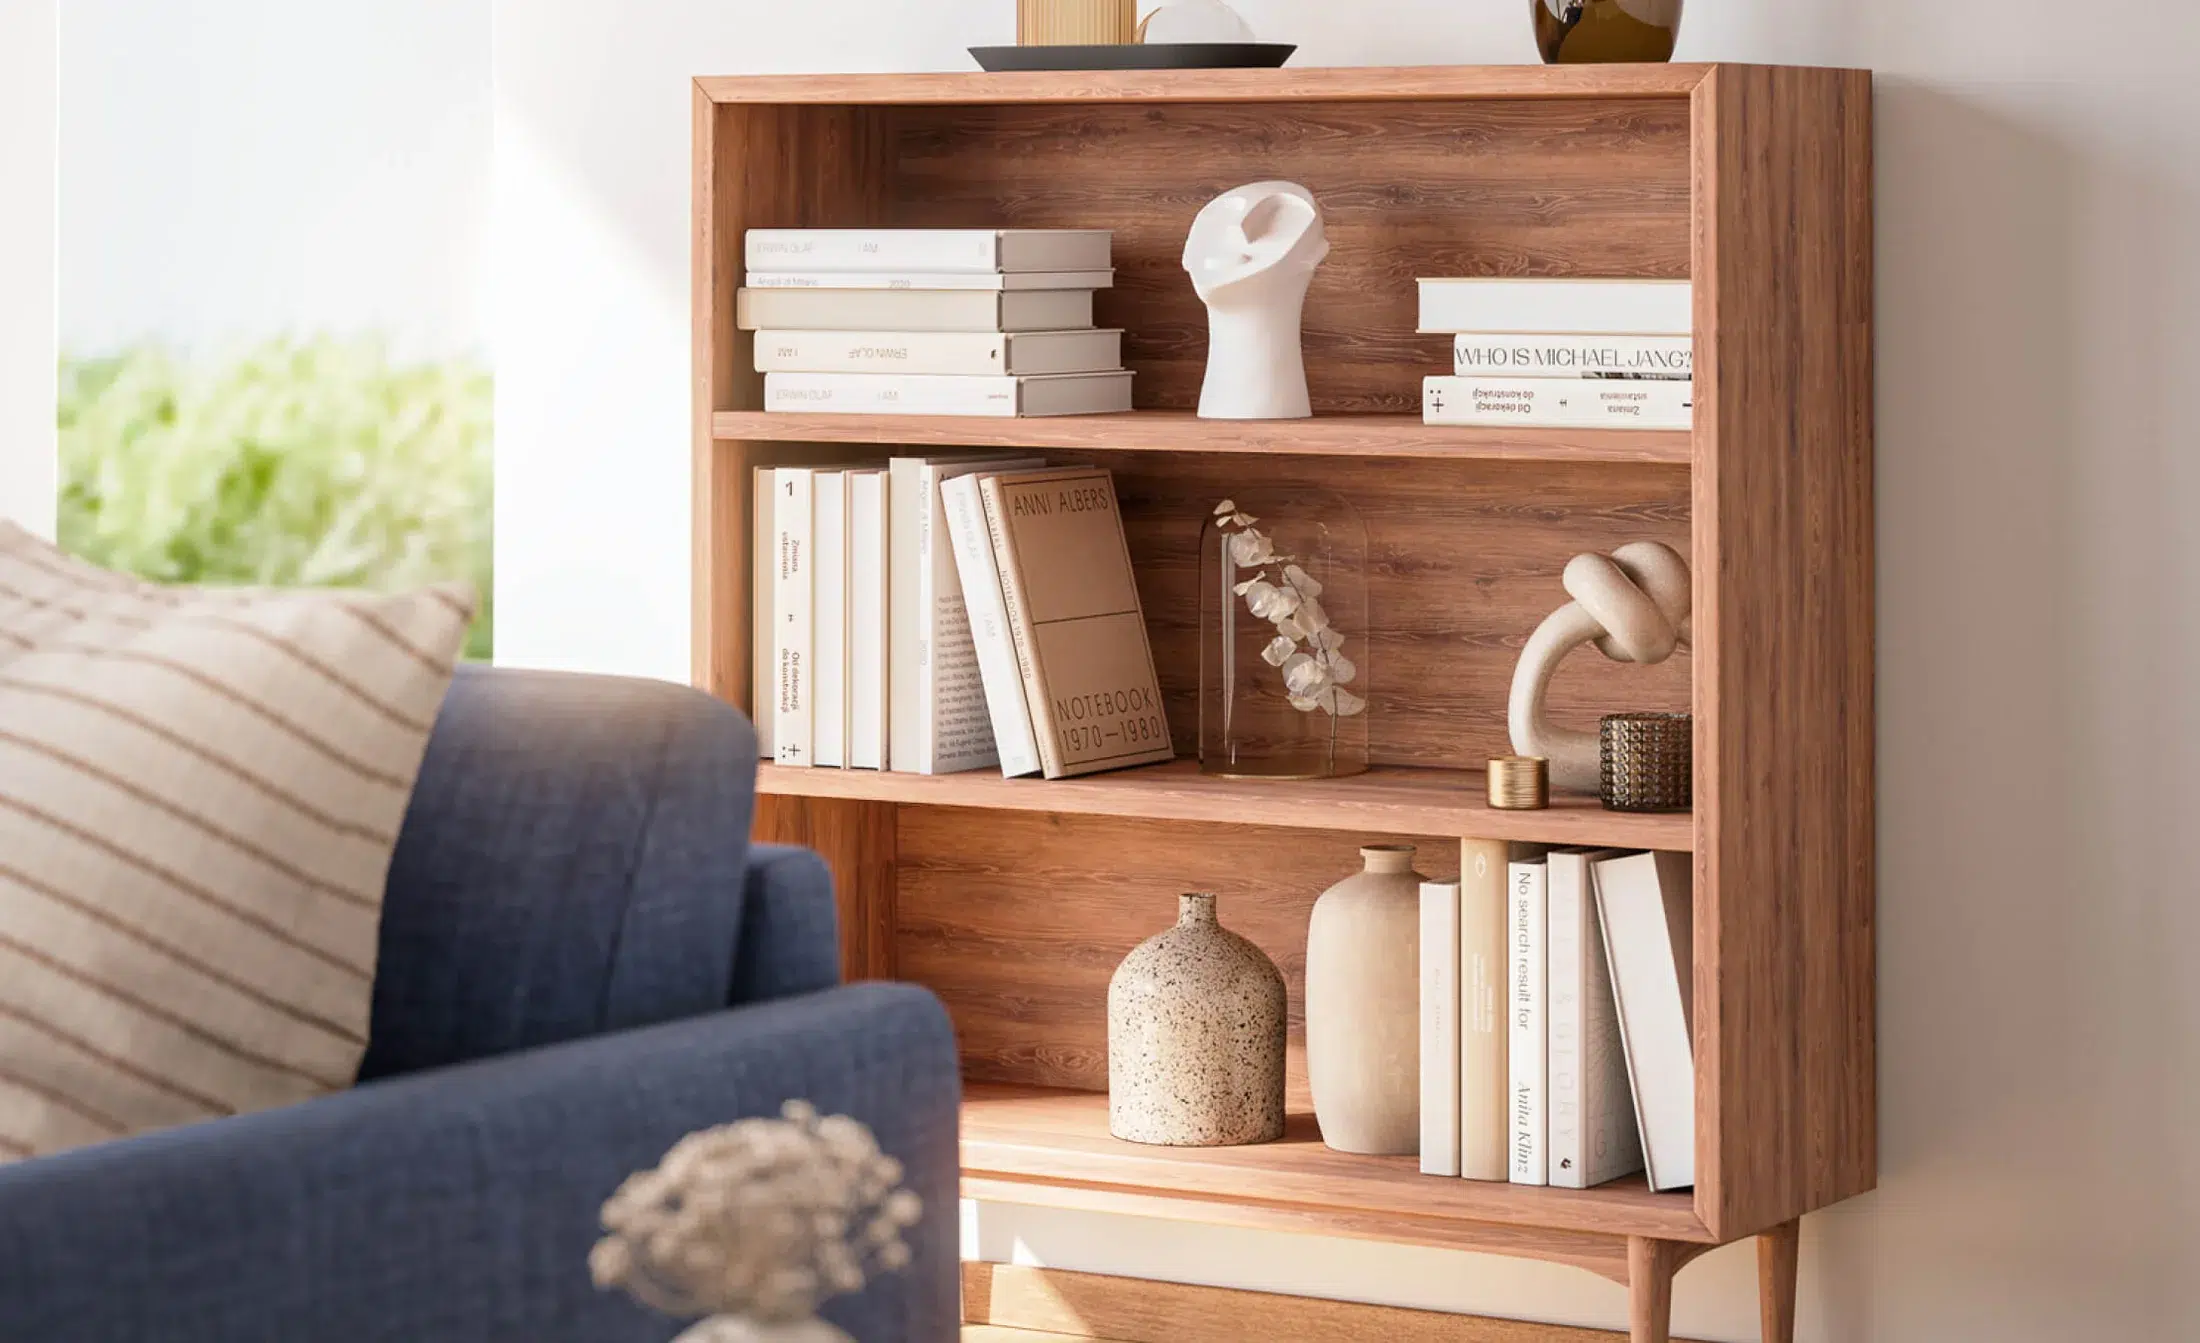 A styled Medley shelf in a styled living space. 